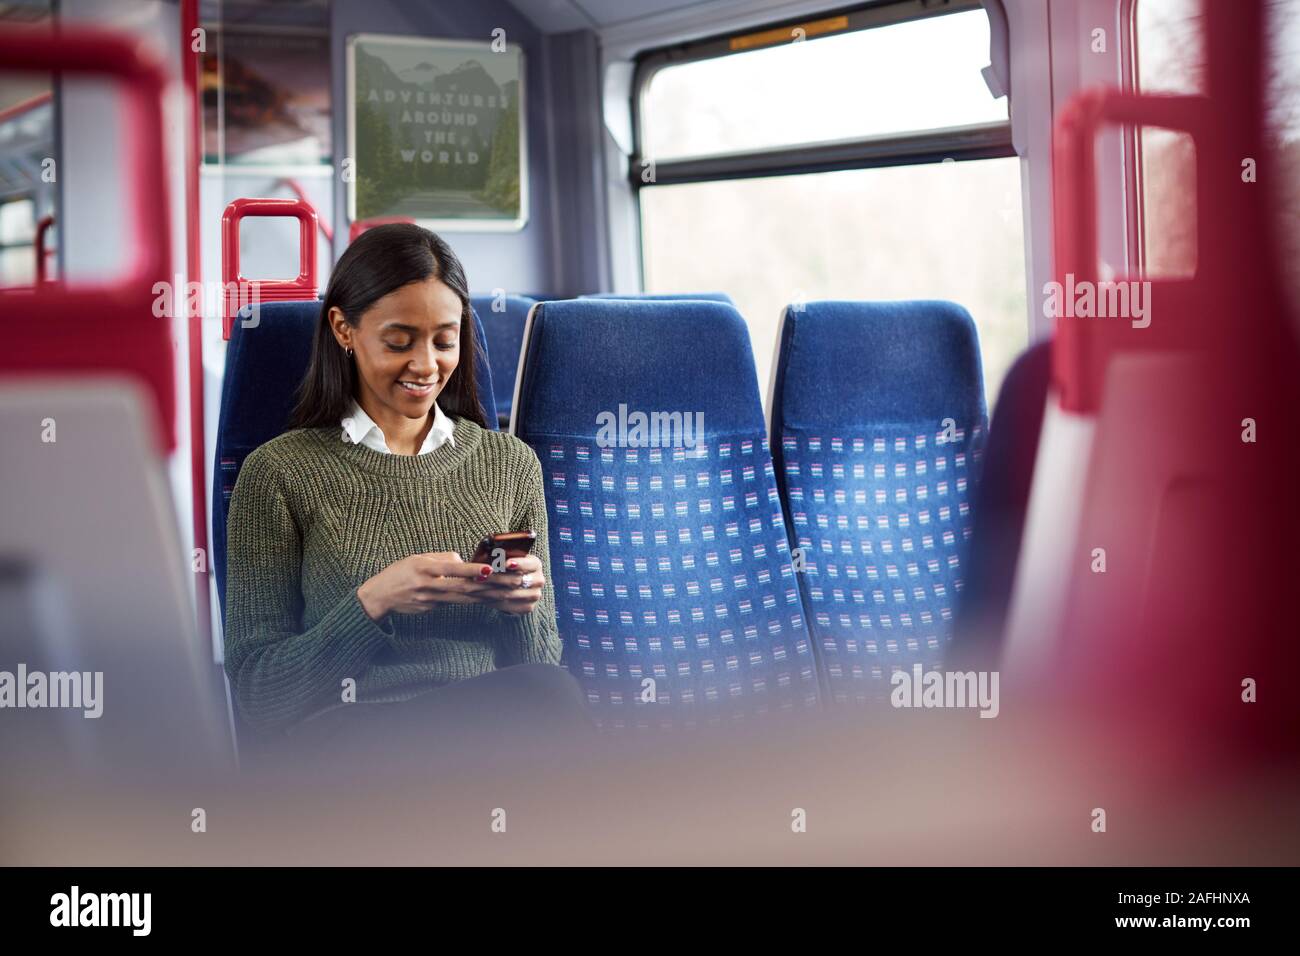 Female Passenger Sitting In Train Looking At Mobile Phone Stock Photo